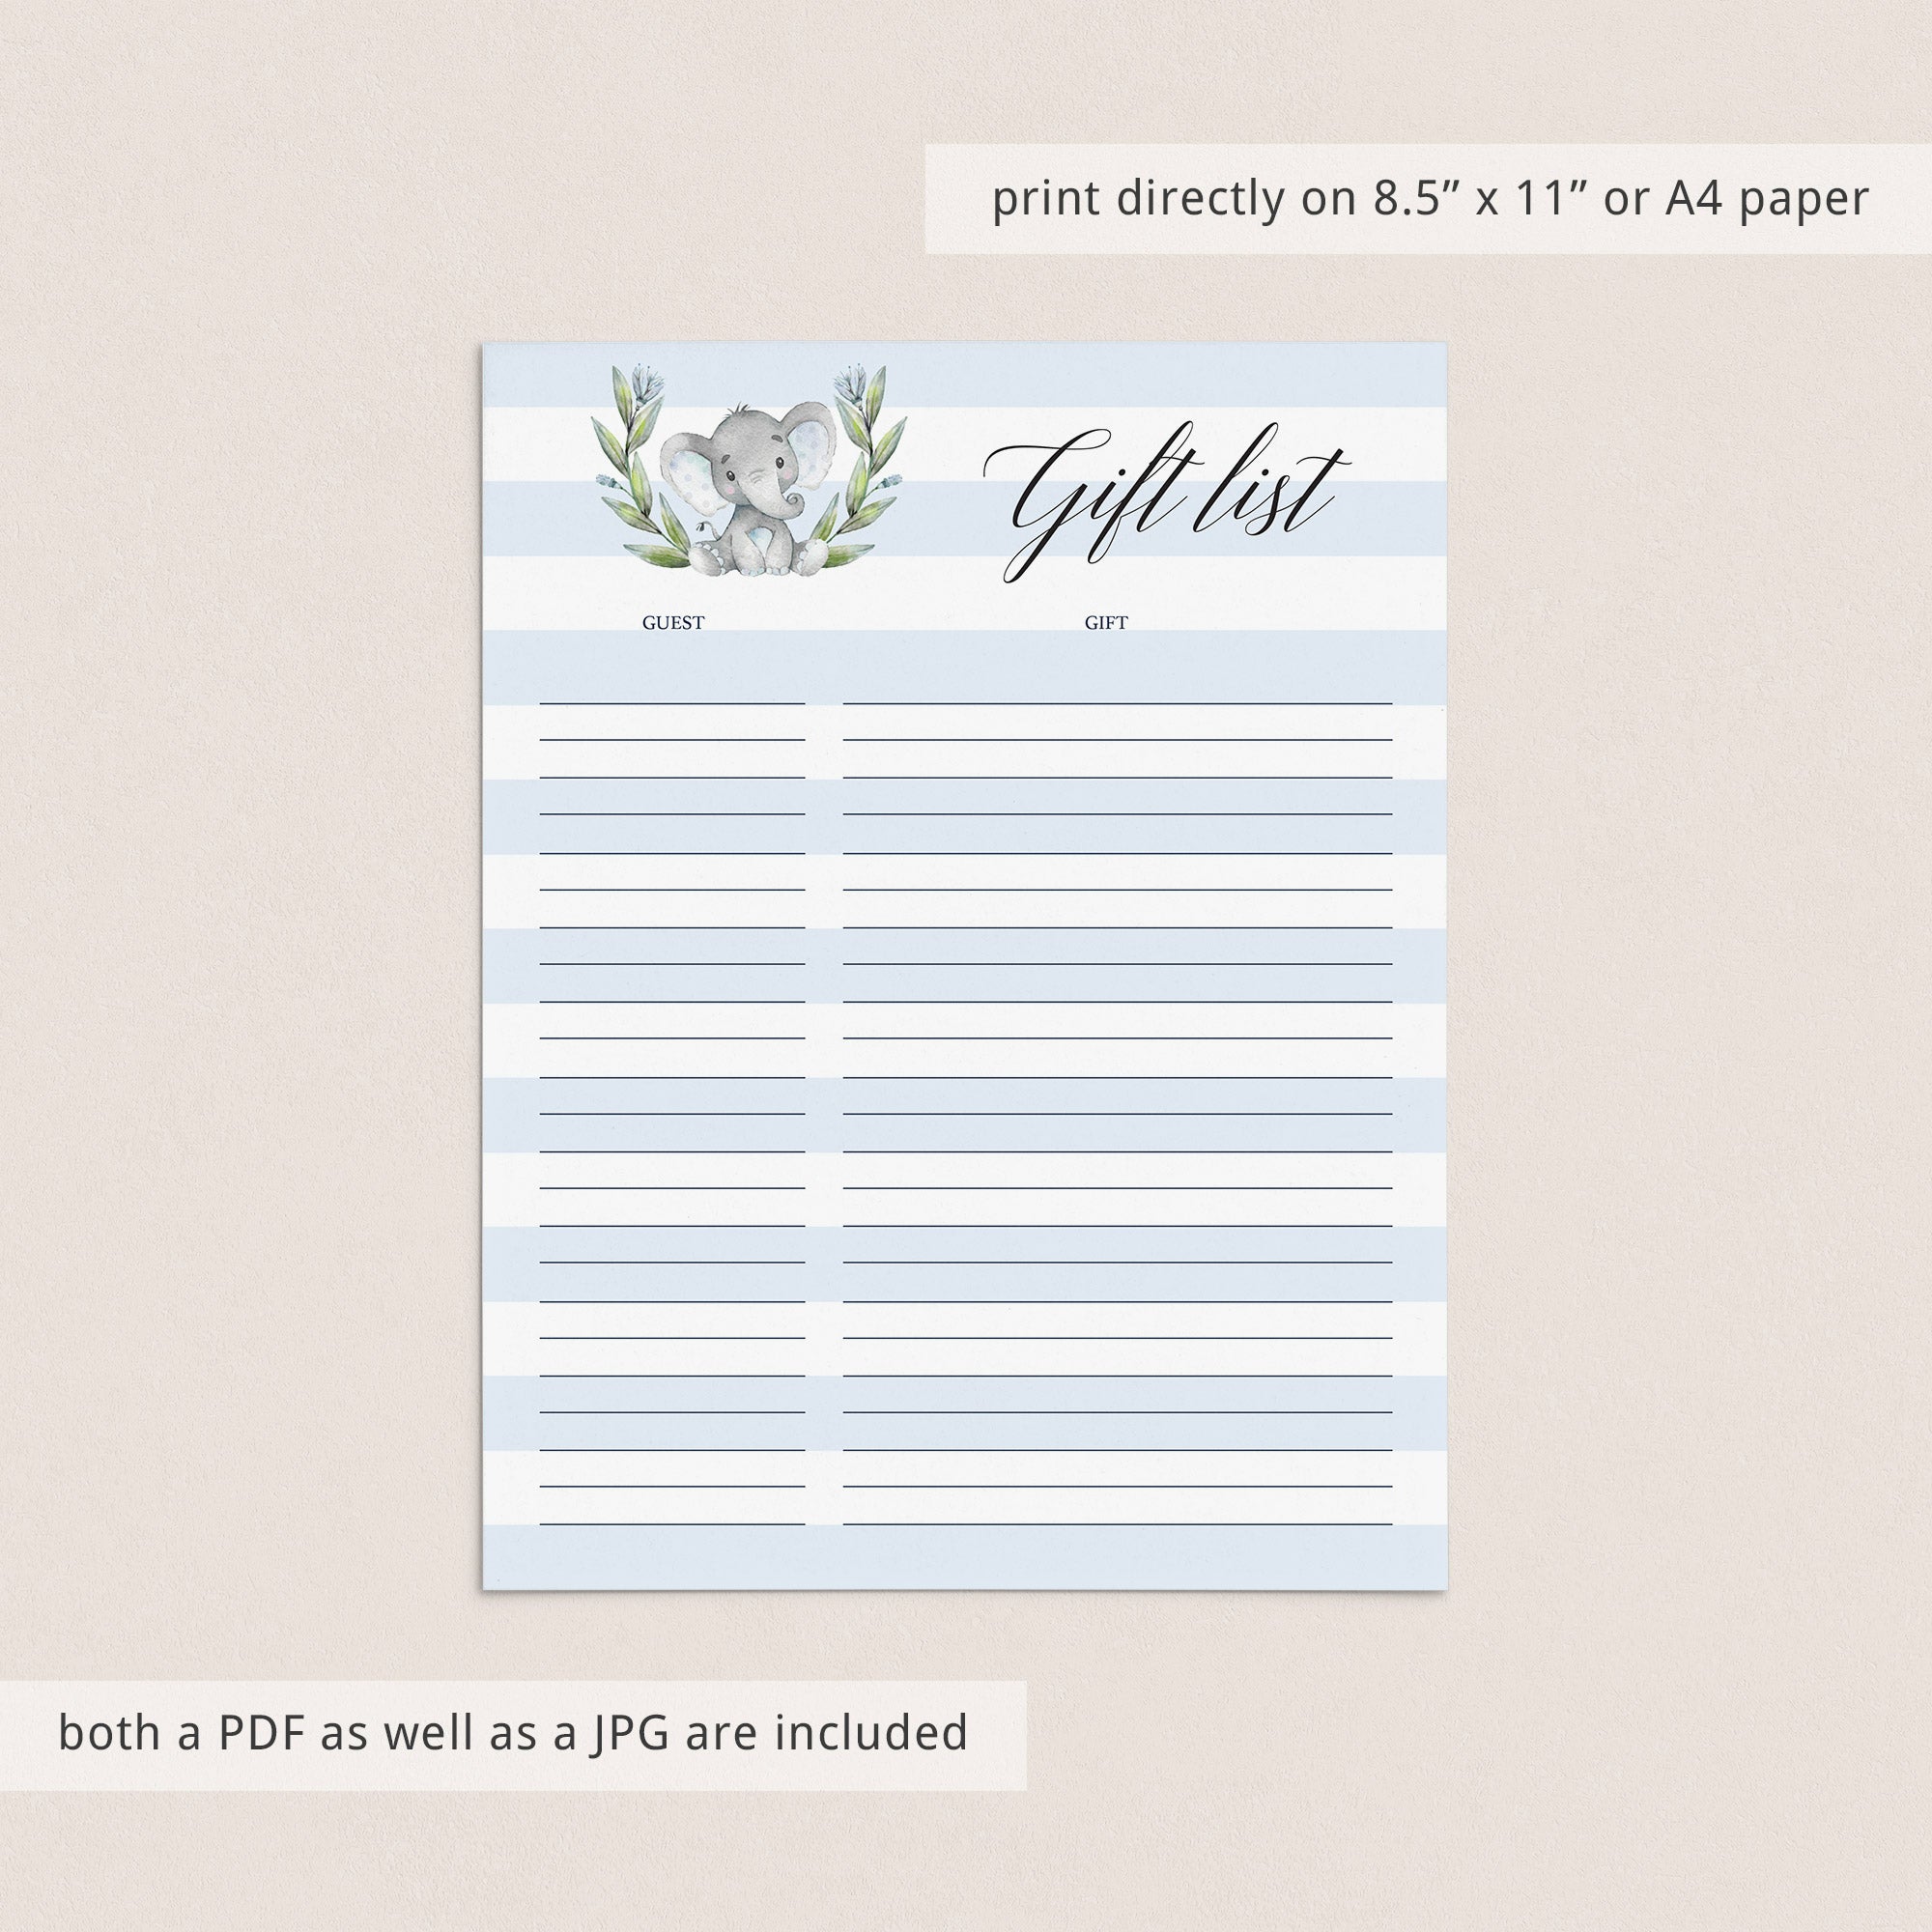 Gift list for elephant themed baby boy shower printable by LittleSizzle